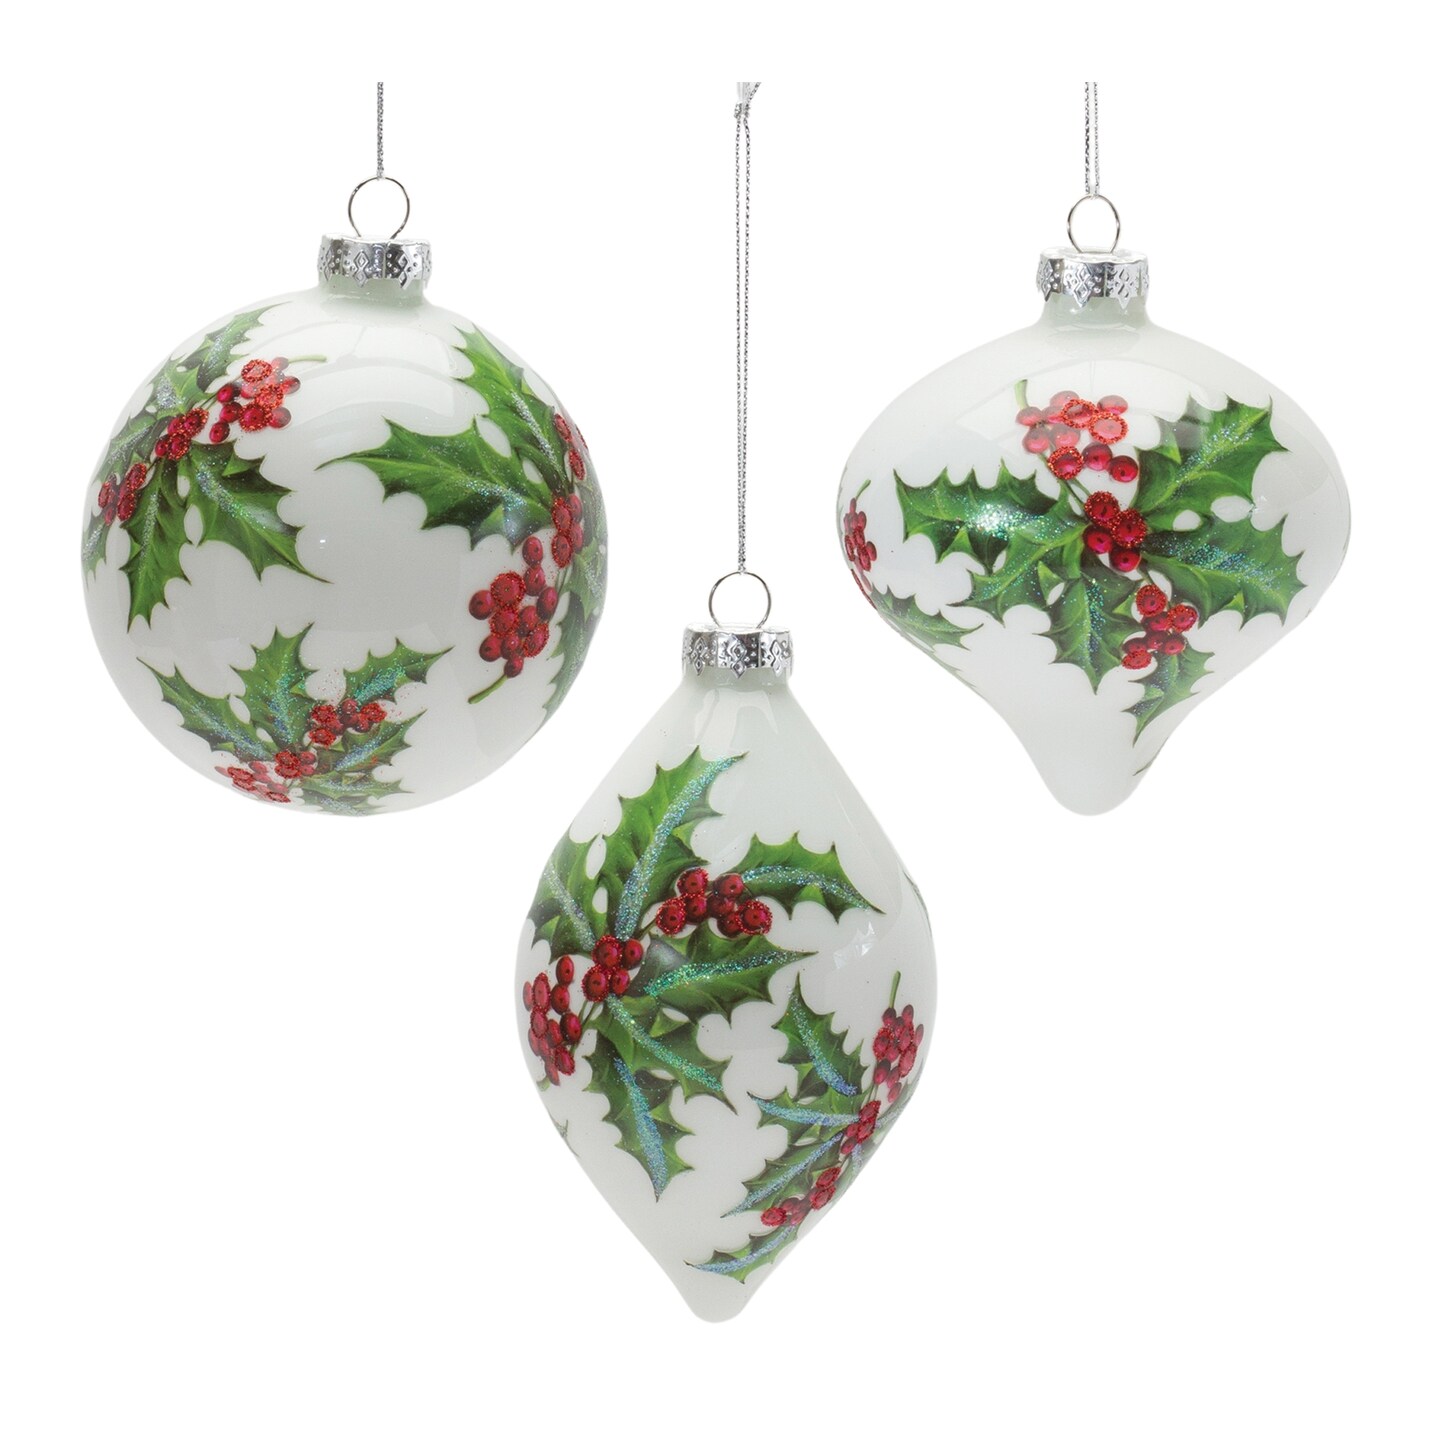 Melrose 6ct Holly Berry Glass Christmas Ornaments 6